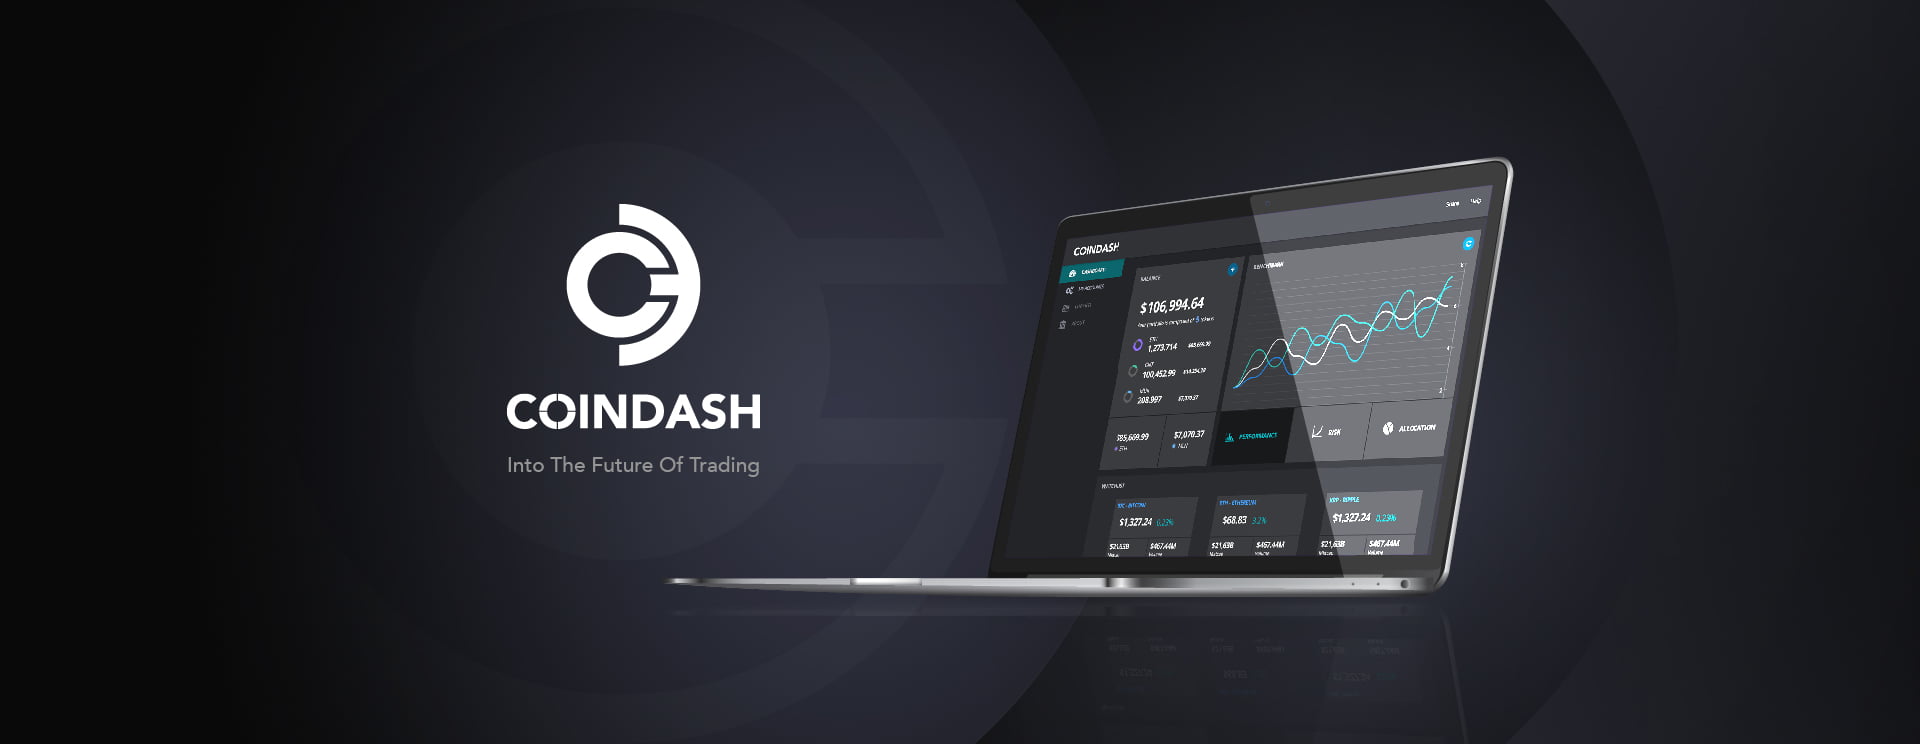 Coindash Looking for Smart Strategies with #MoonTrader Campaign